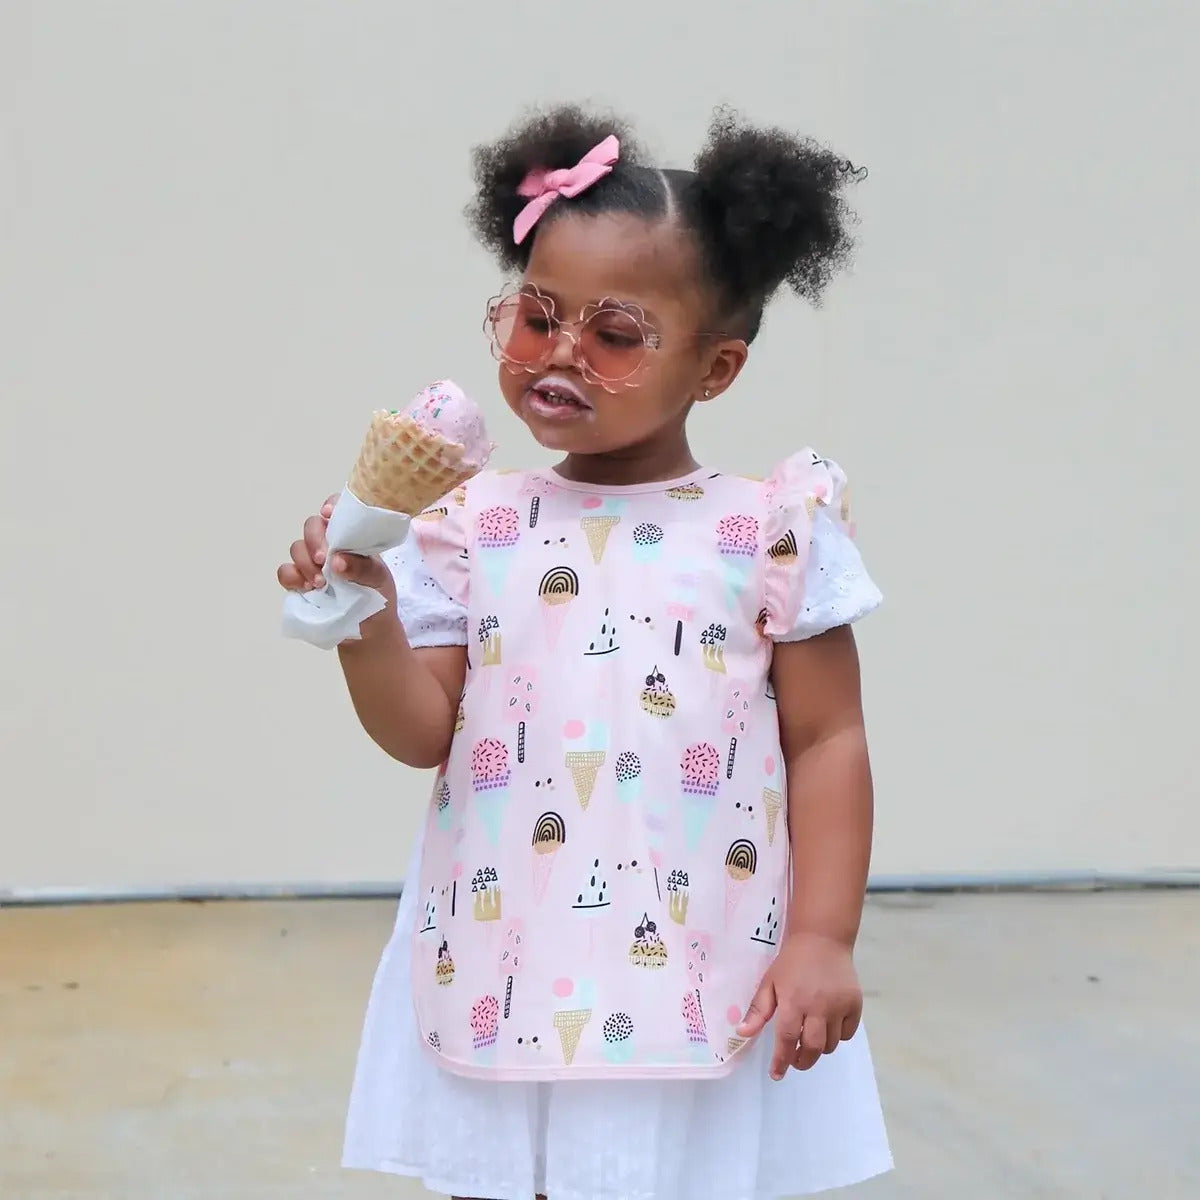 BapronBaby® Bapron in Ice Cream Flutter / Bib + Apron That Safely Ties Around the Body